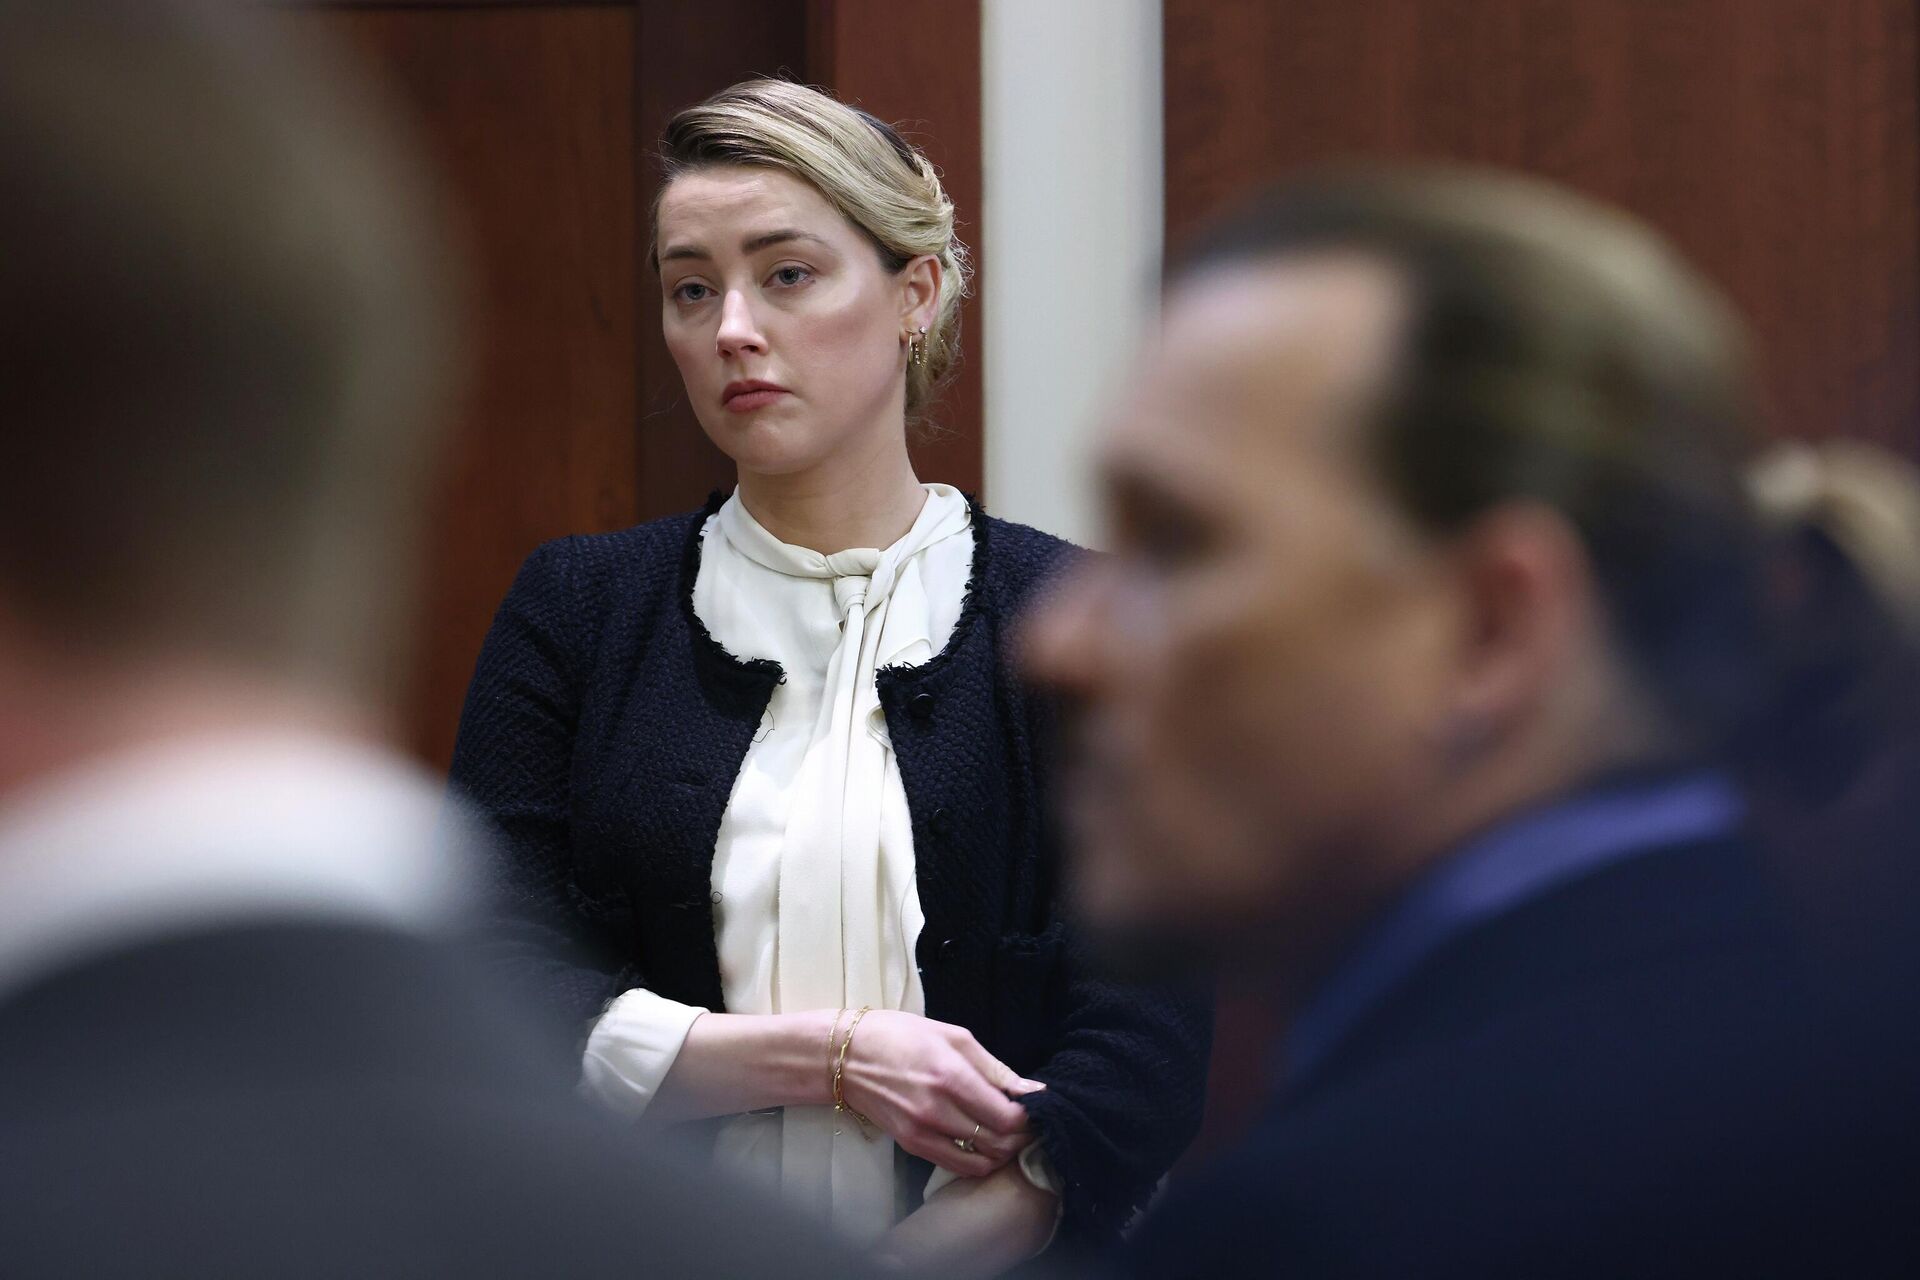 Actor Amber Heard returns after a break in the courtroom at the Fairfax County Circuit Court in Fairfax, Va., Thursday, May 5, 2022. - Sputnik International, 1920, 23.12.2022